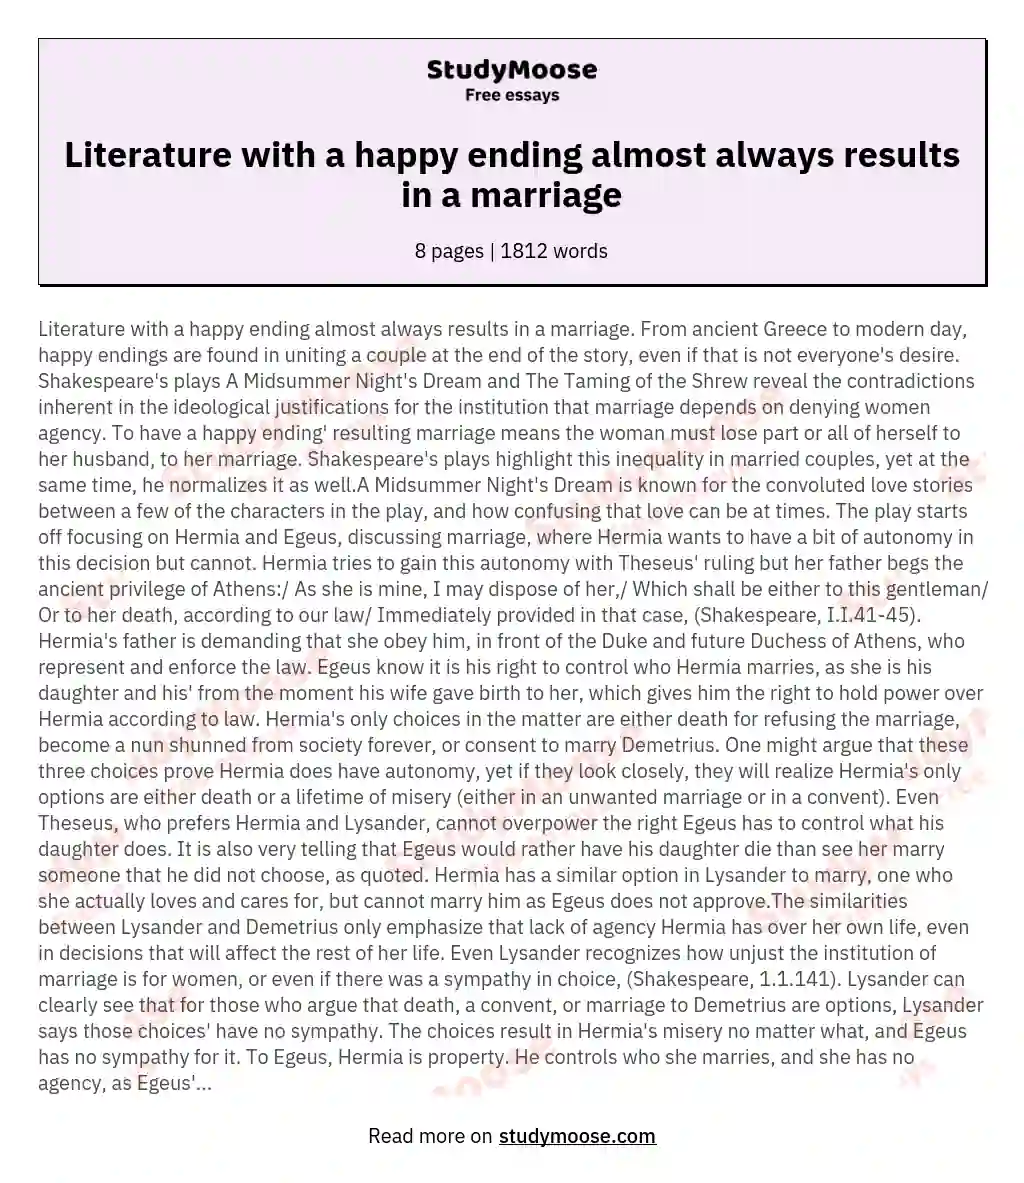 Literature with a happy ending almost always results in a marriage essay